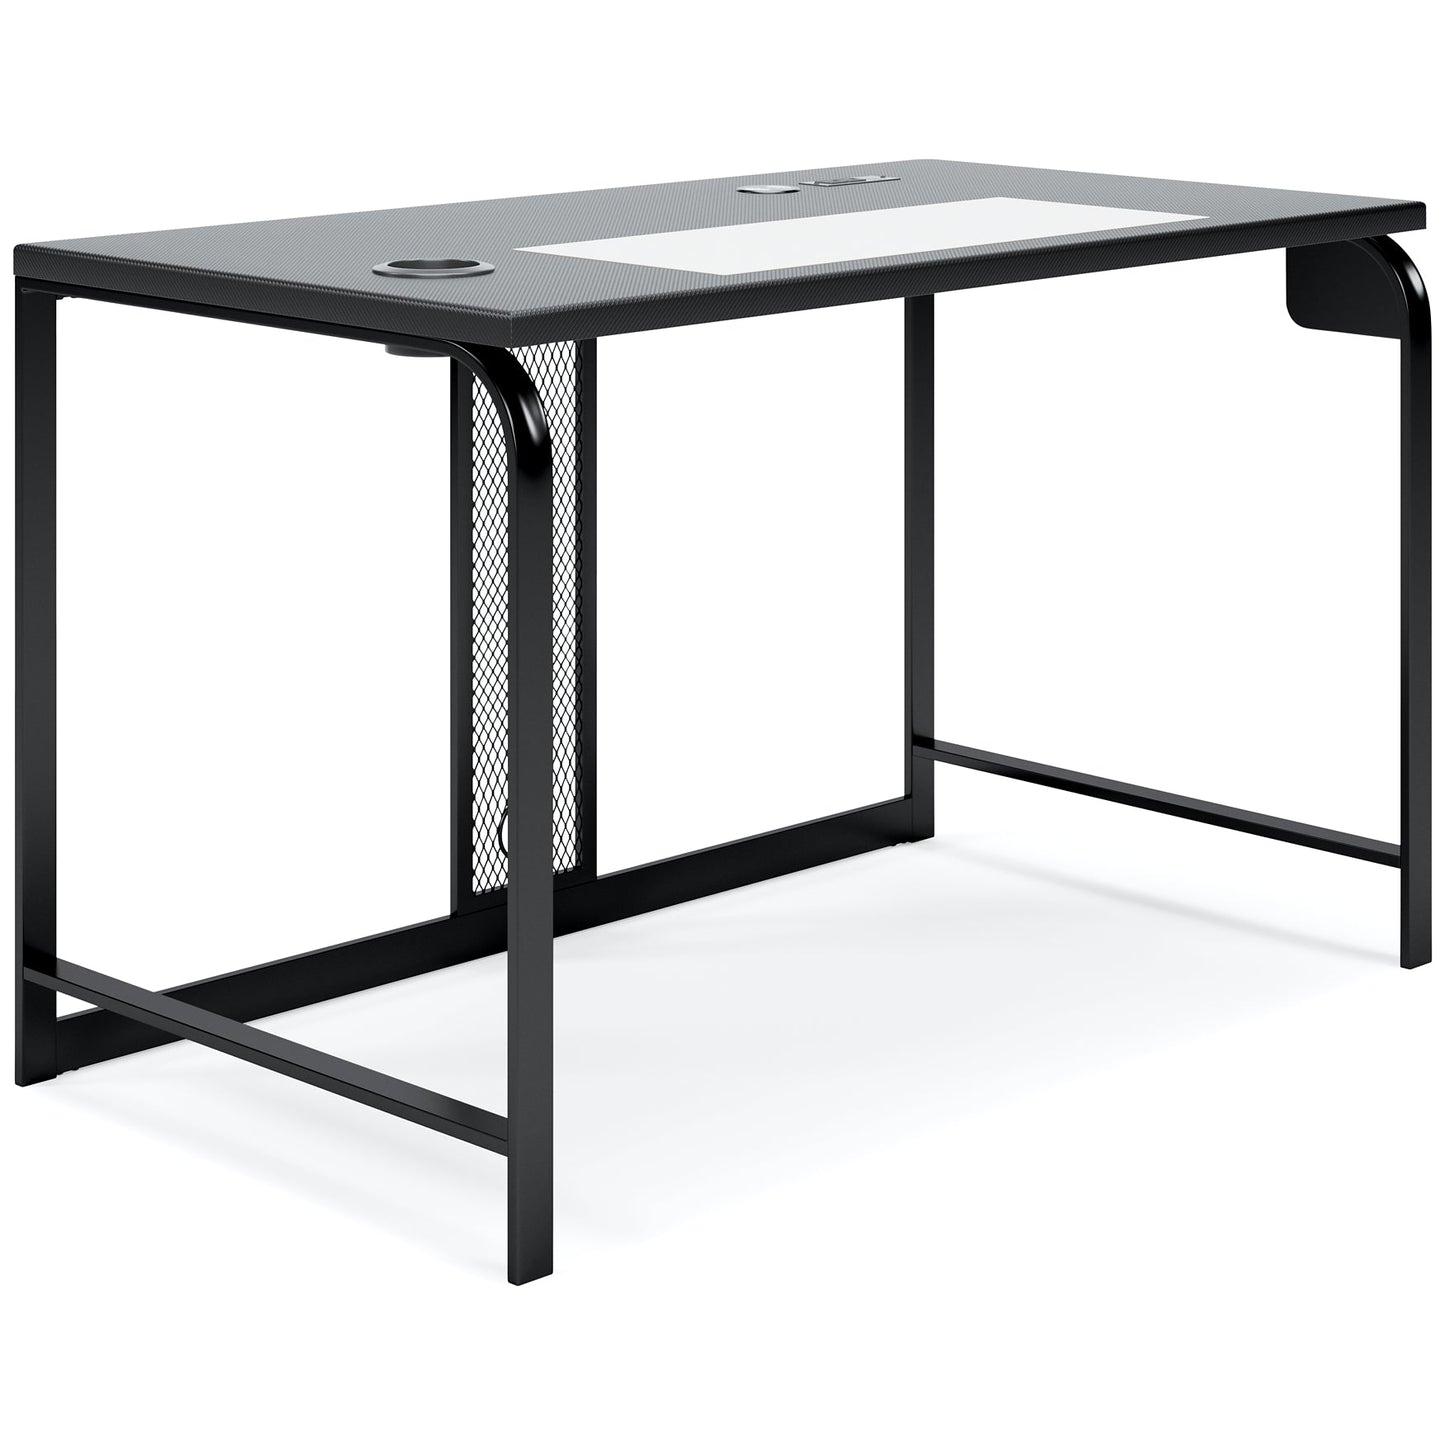 Lynxtyn Home Office Desk with Chair Smyrna Furniture Outlet